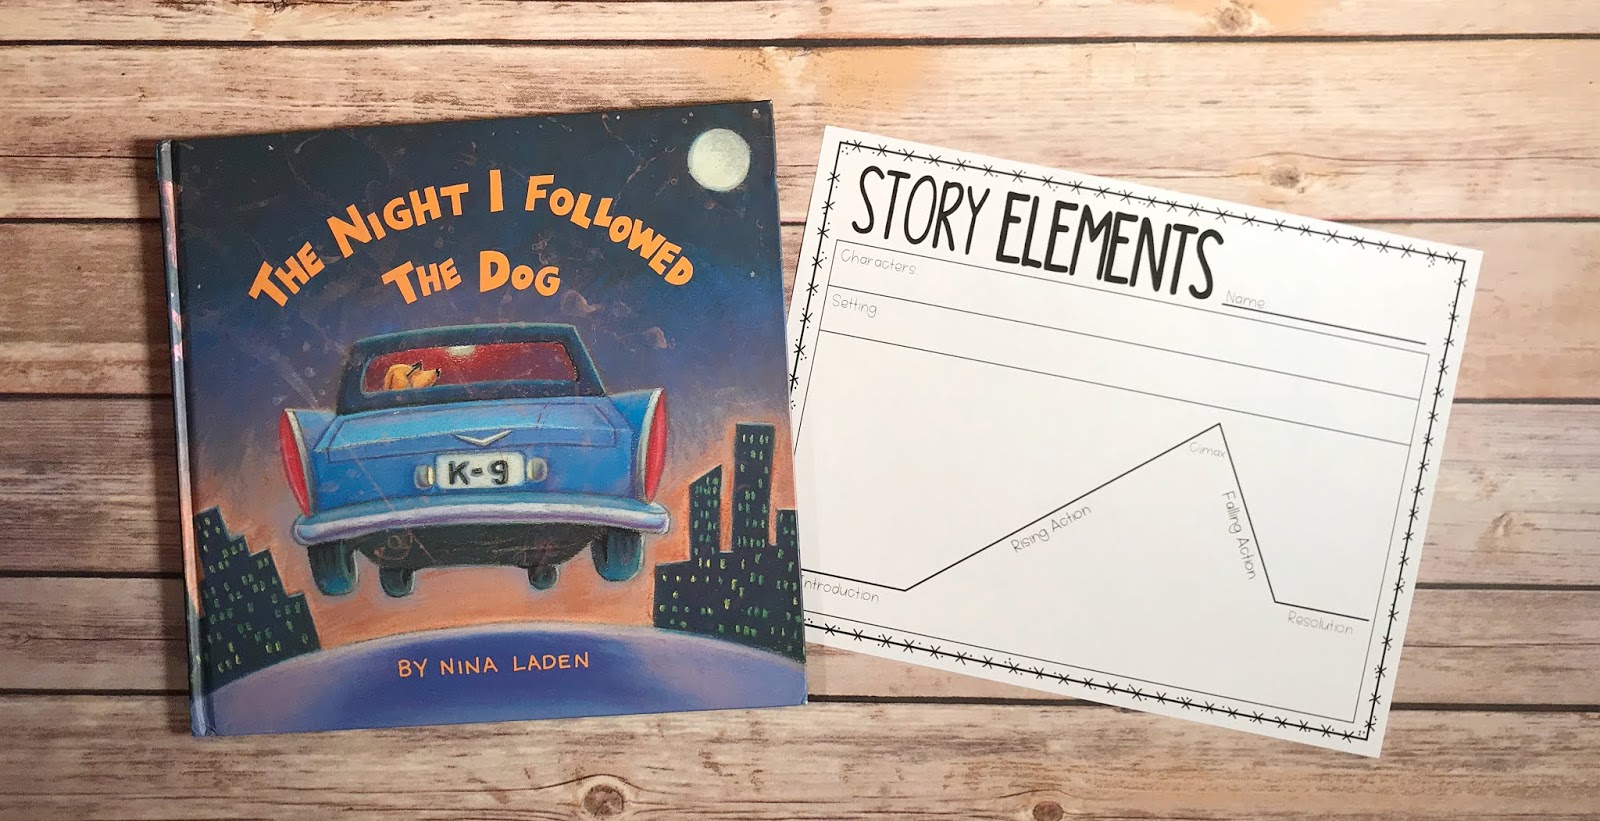 Mentor Text with text "The Night I Followed the Dog" and Graphic Organizer with text "Story Elements"